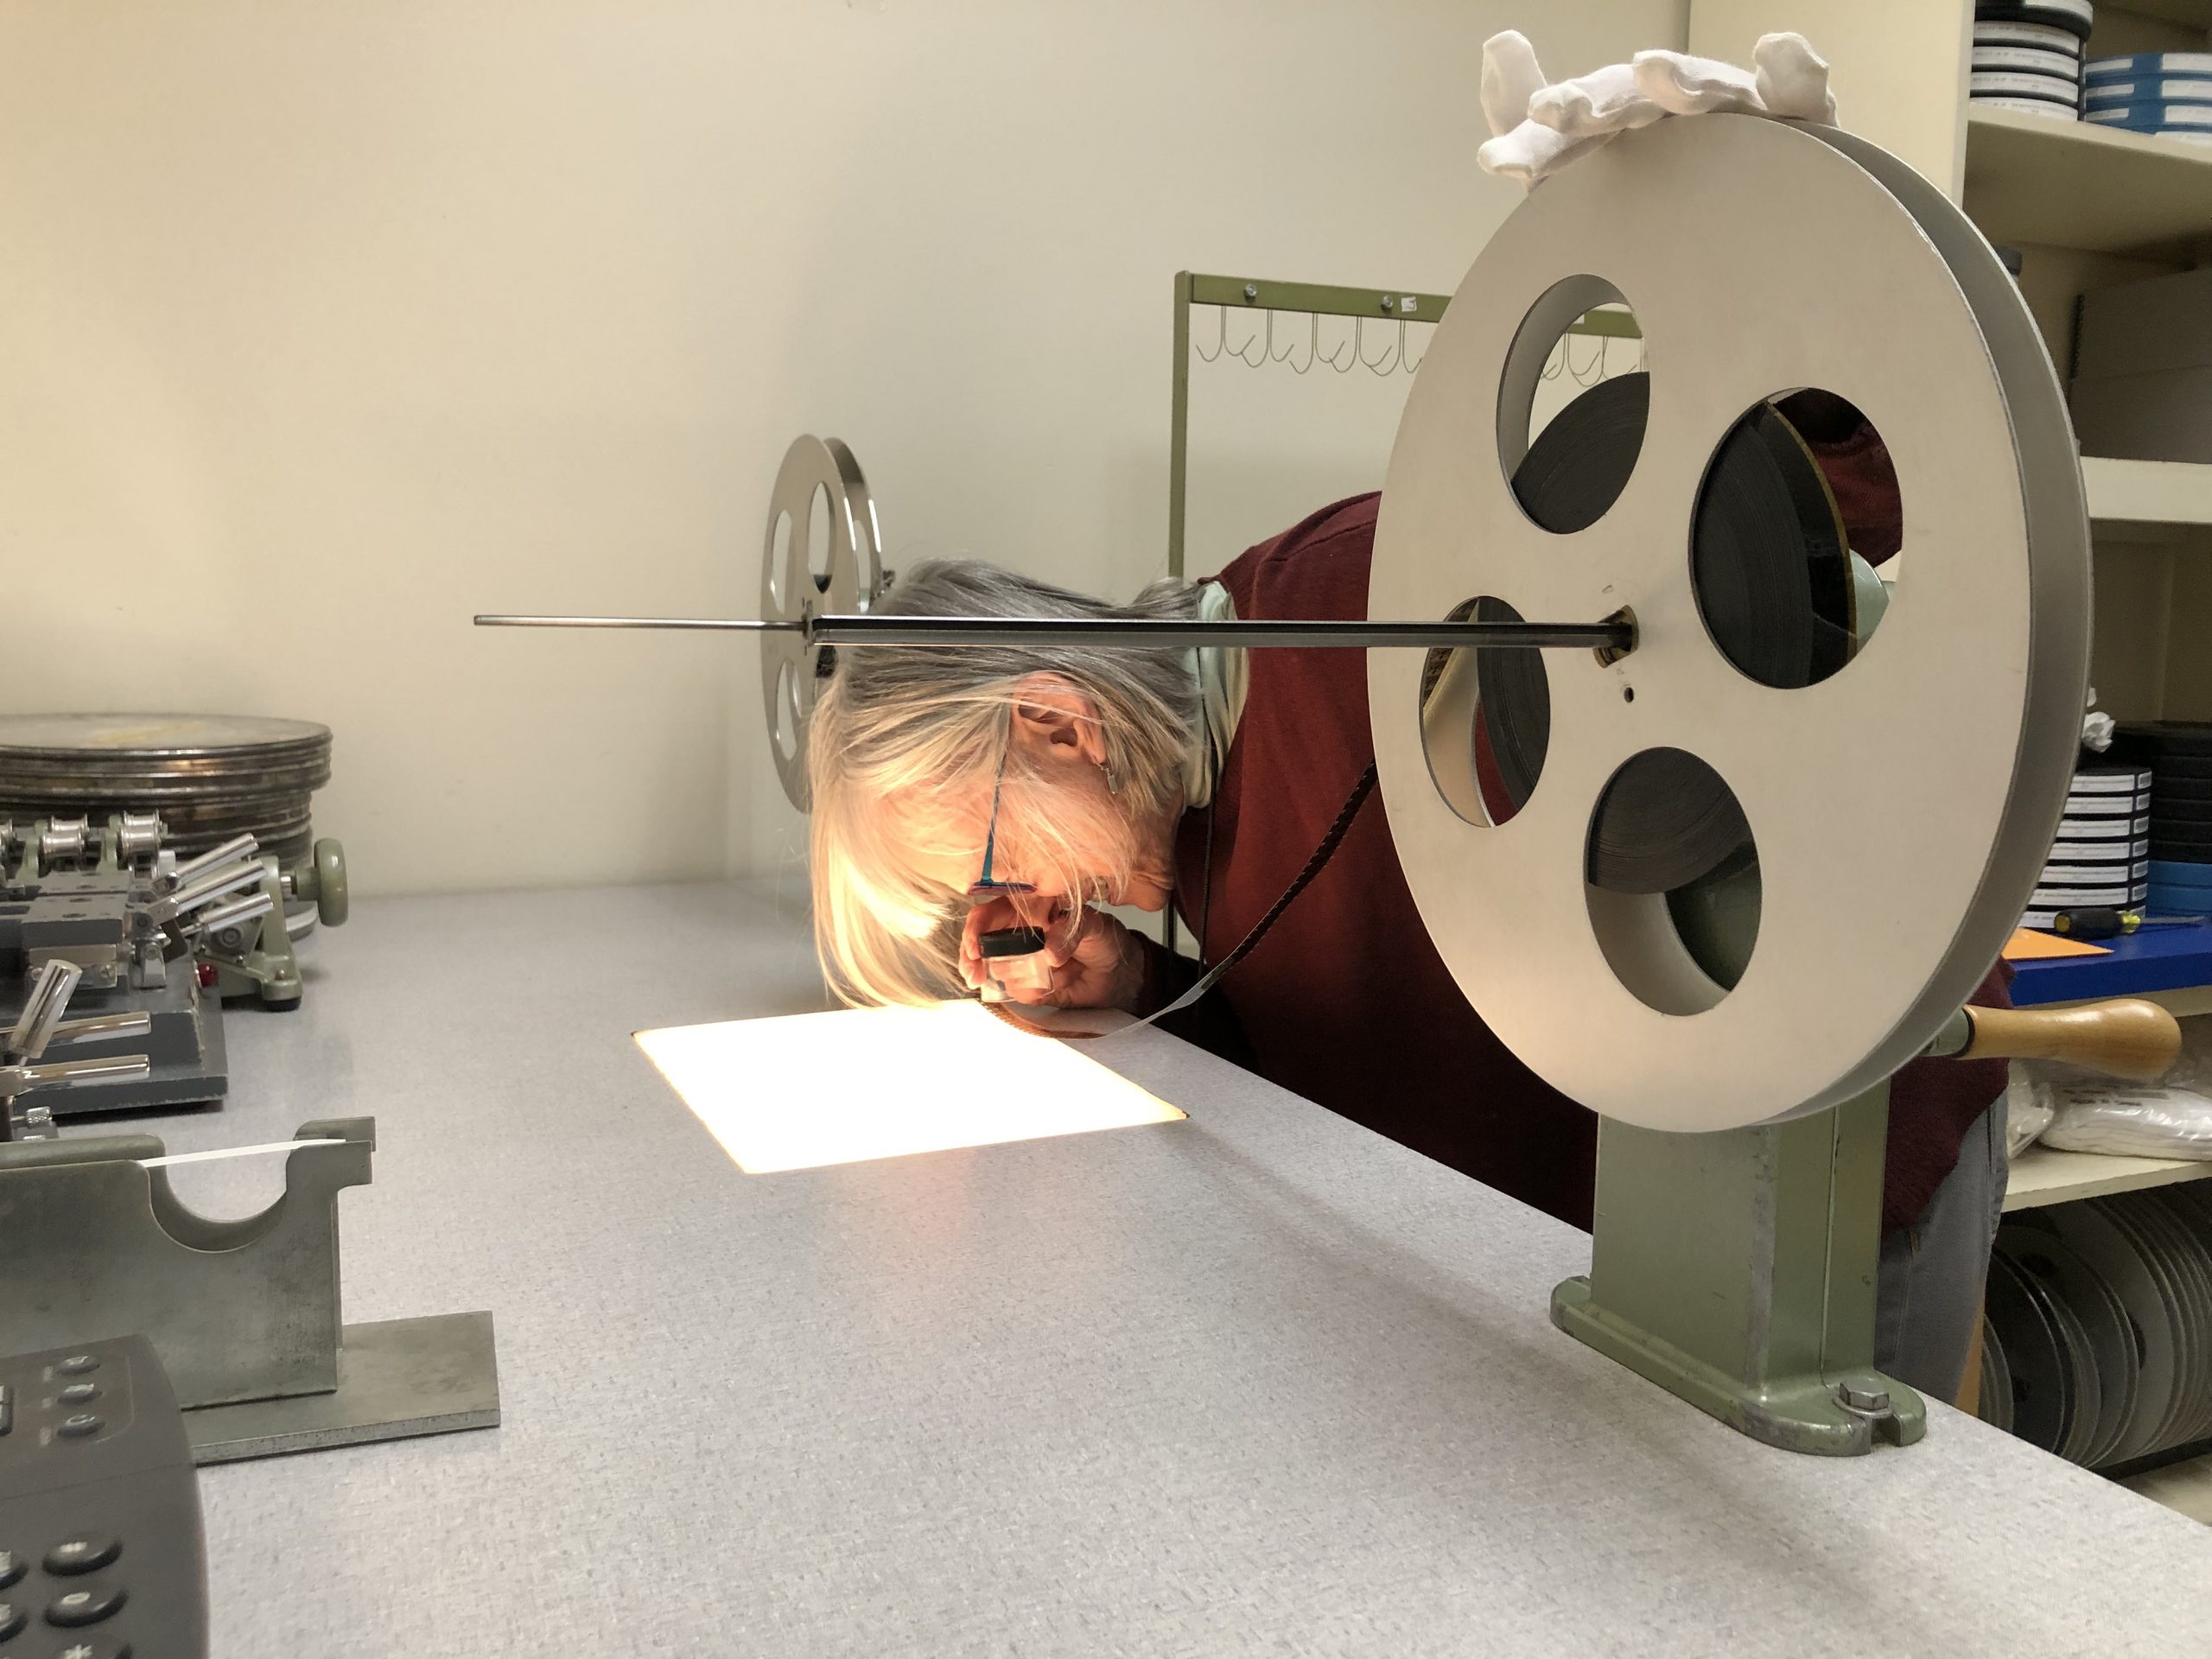 Smithsonian Film Archivist Pam Wintle closely inspects a 16mm film through a magnifying loupe lens over a light box.